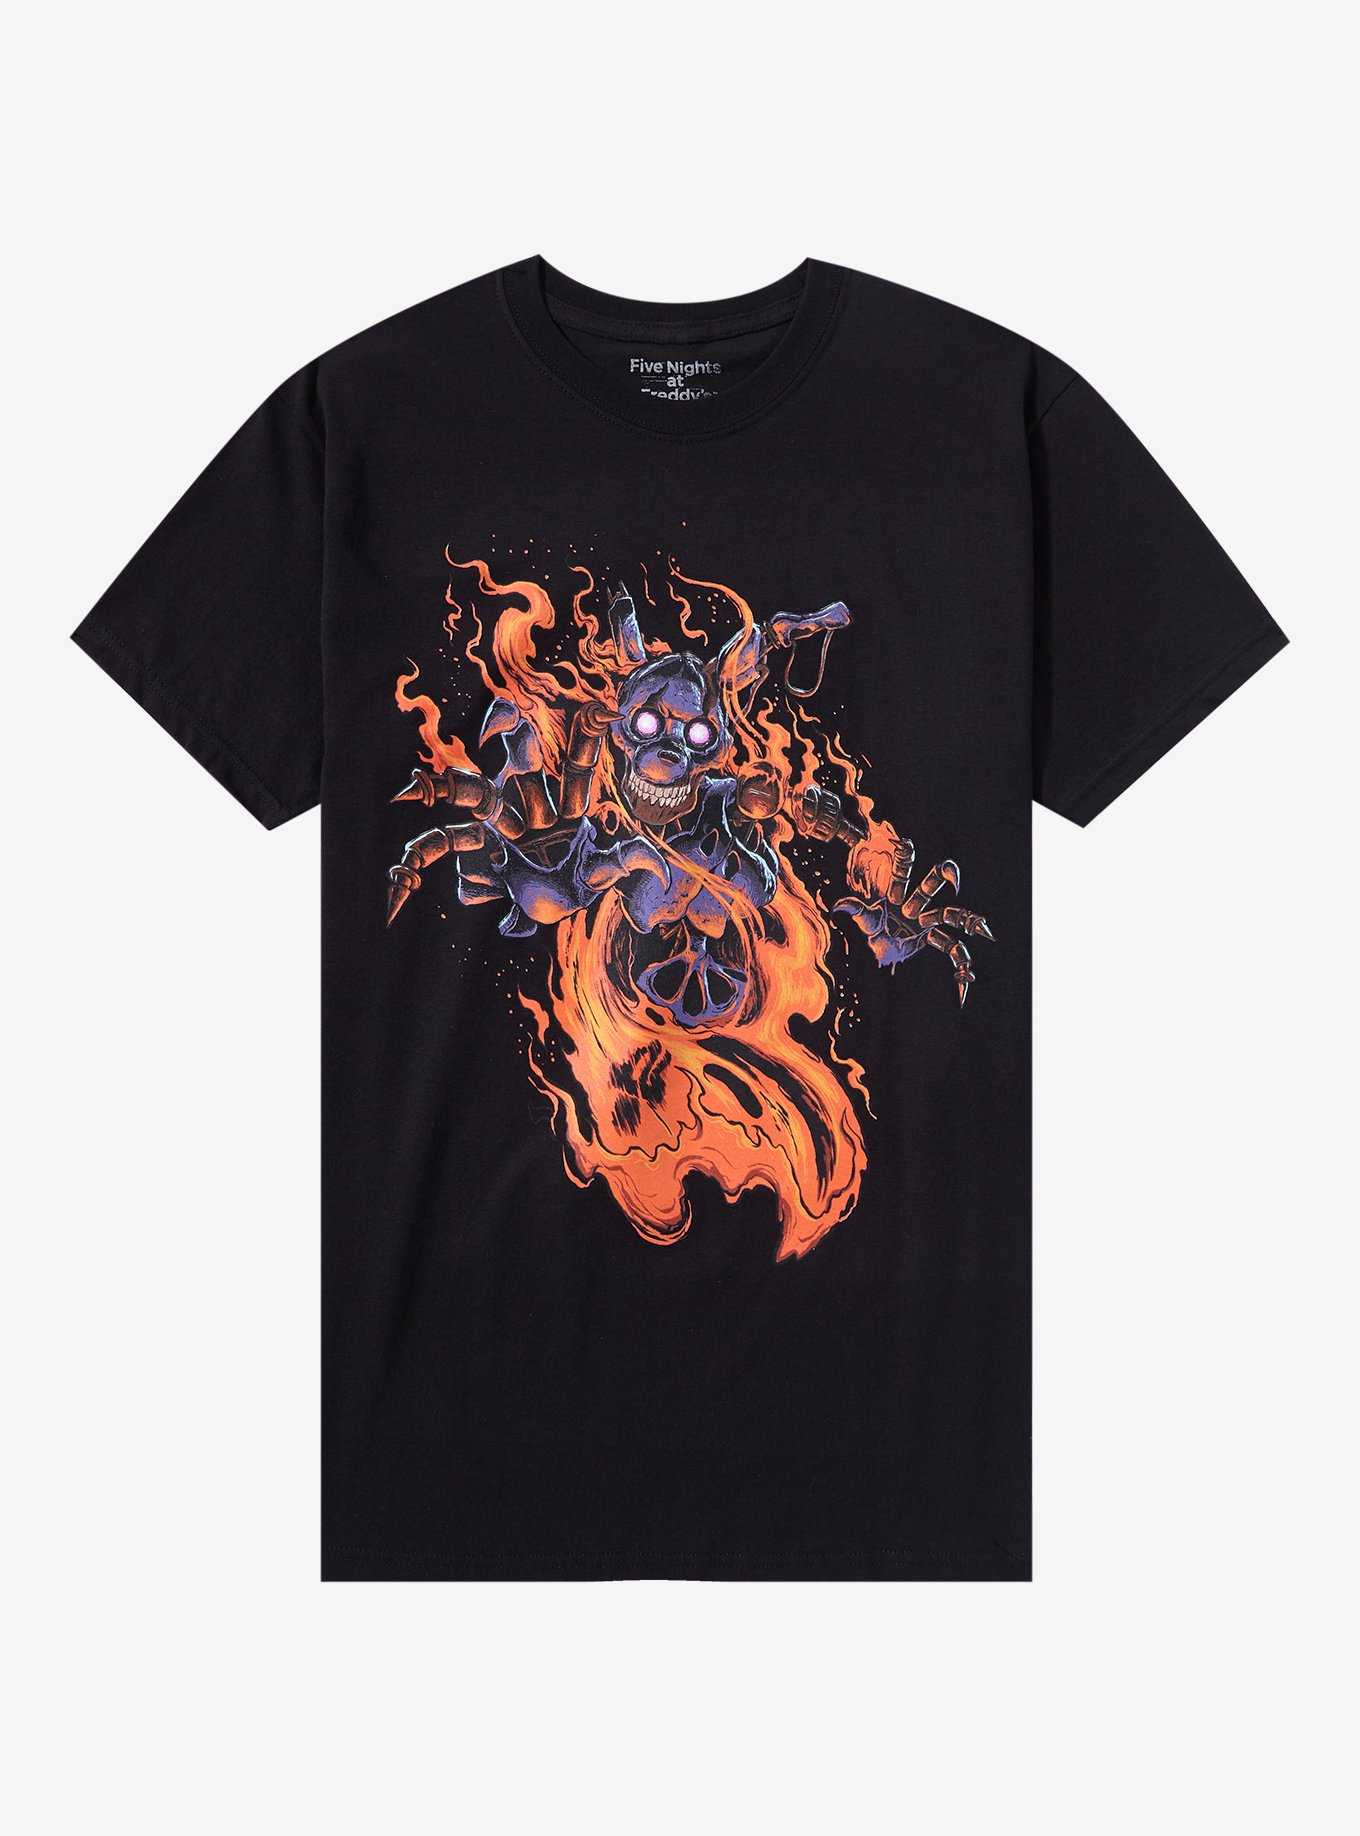 Five Nights At Freddy's Burntrap Fire T-Shirt, , hi-res